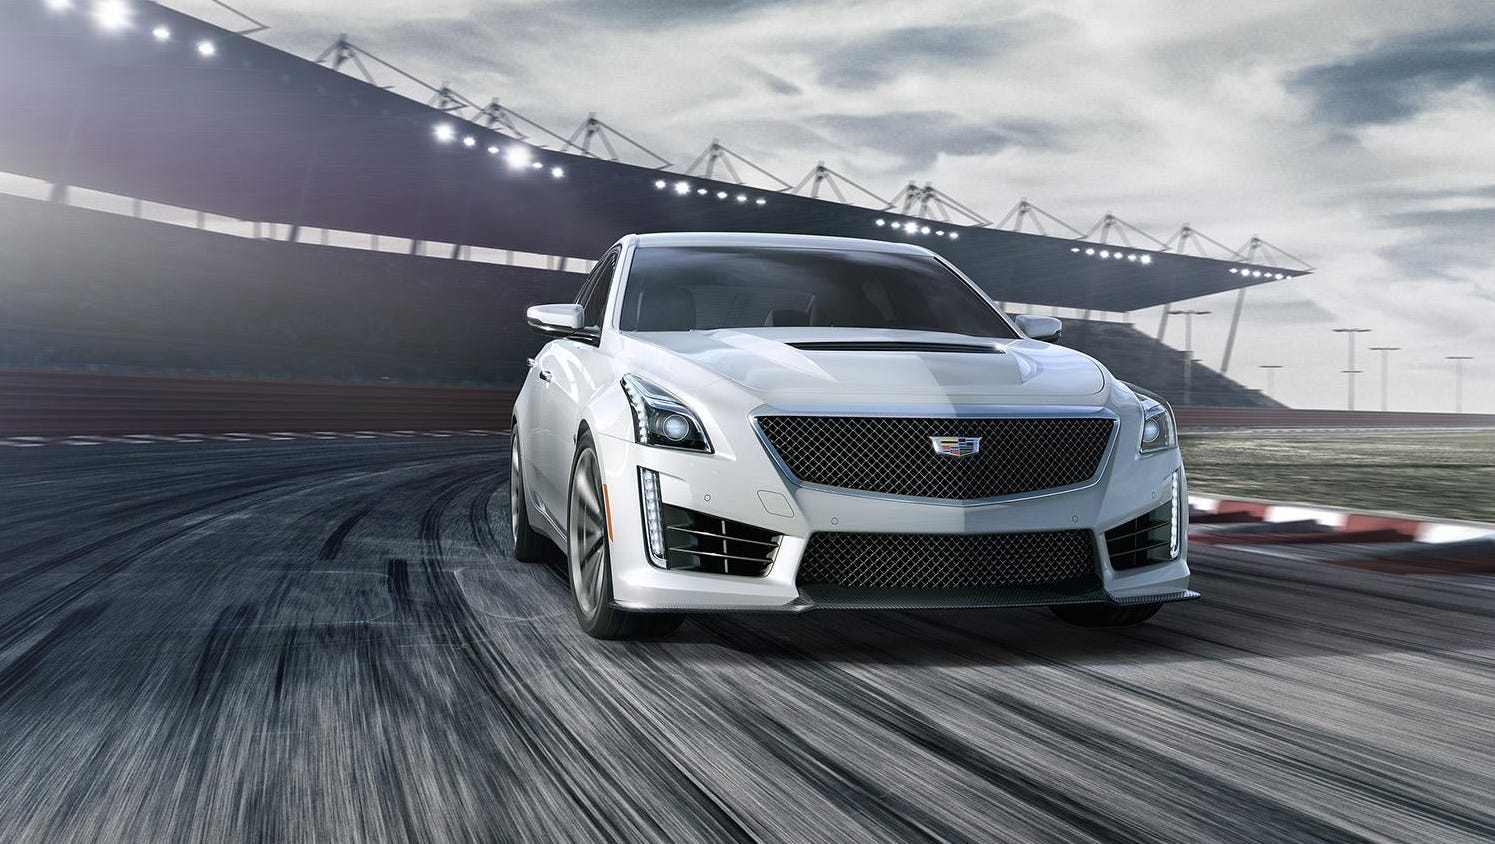 Review: CTS-V is superb performer, but is it superb Cadillac?